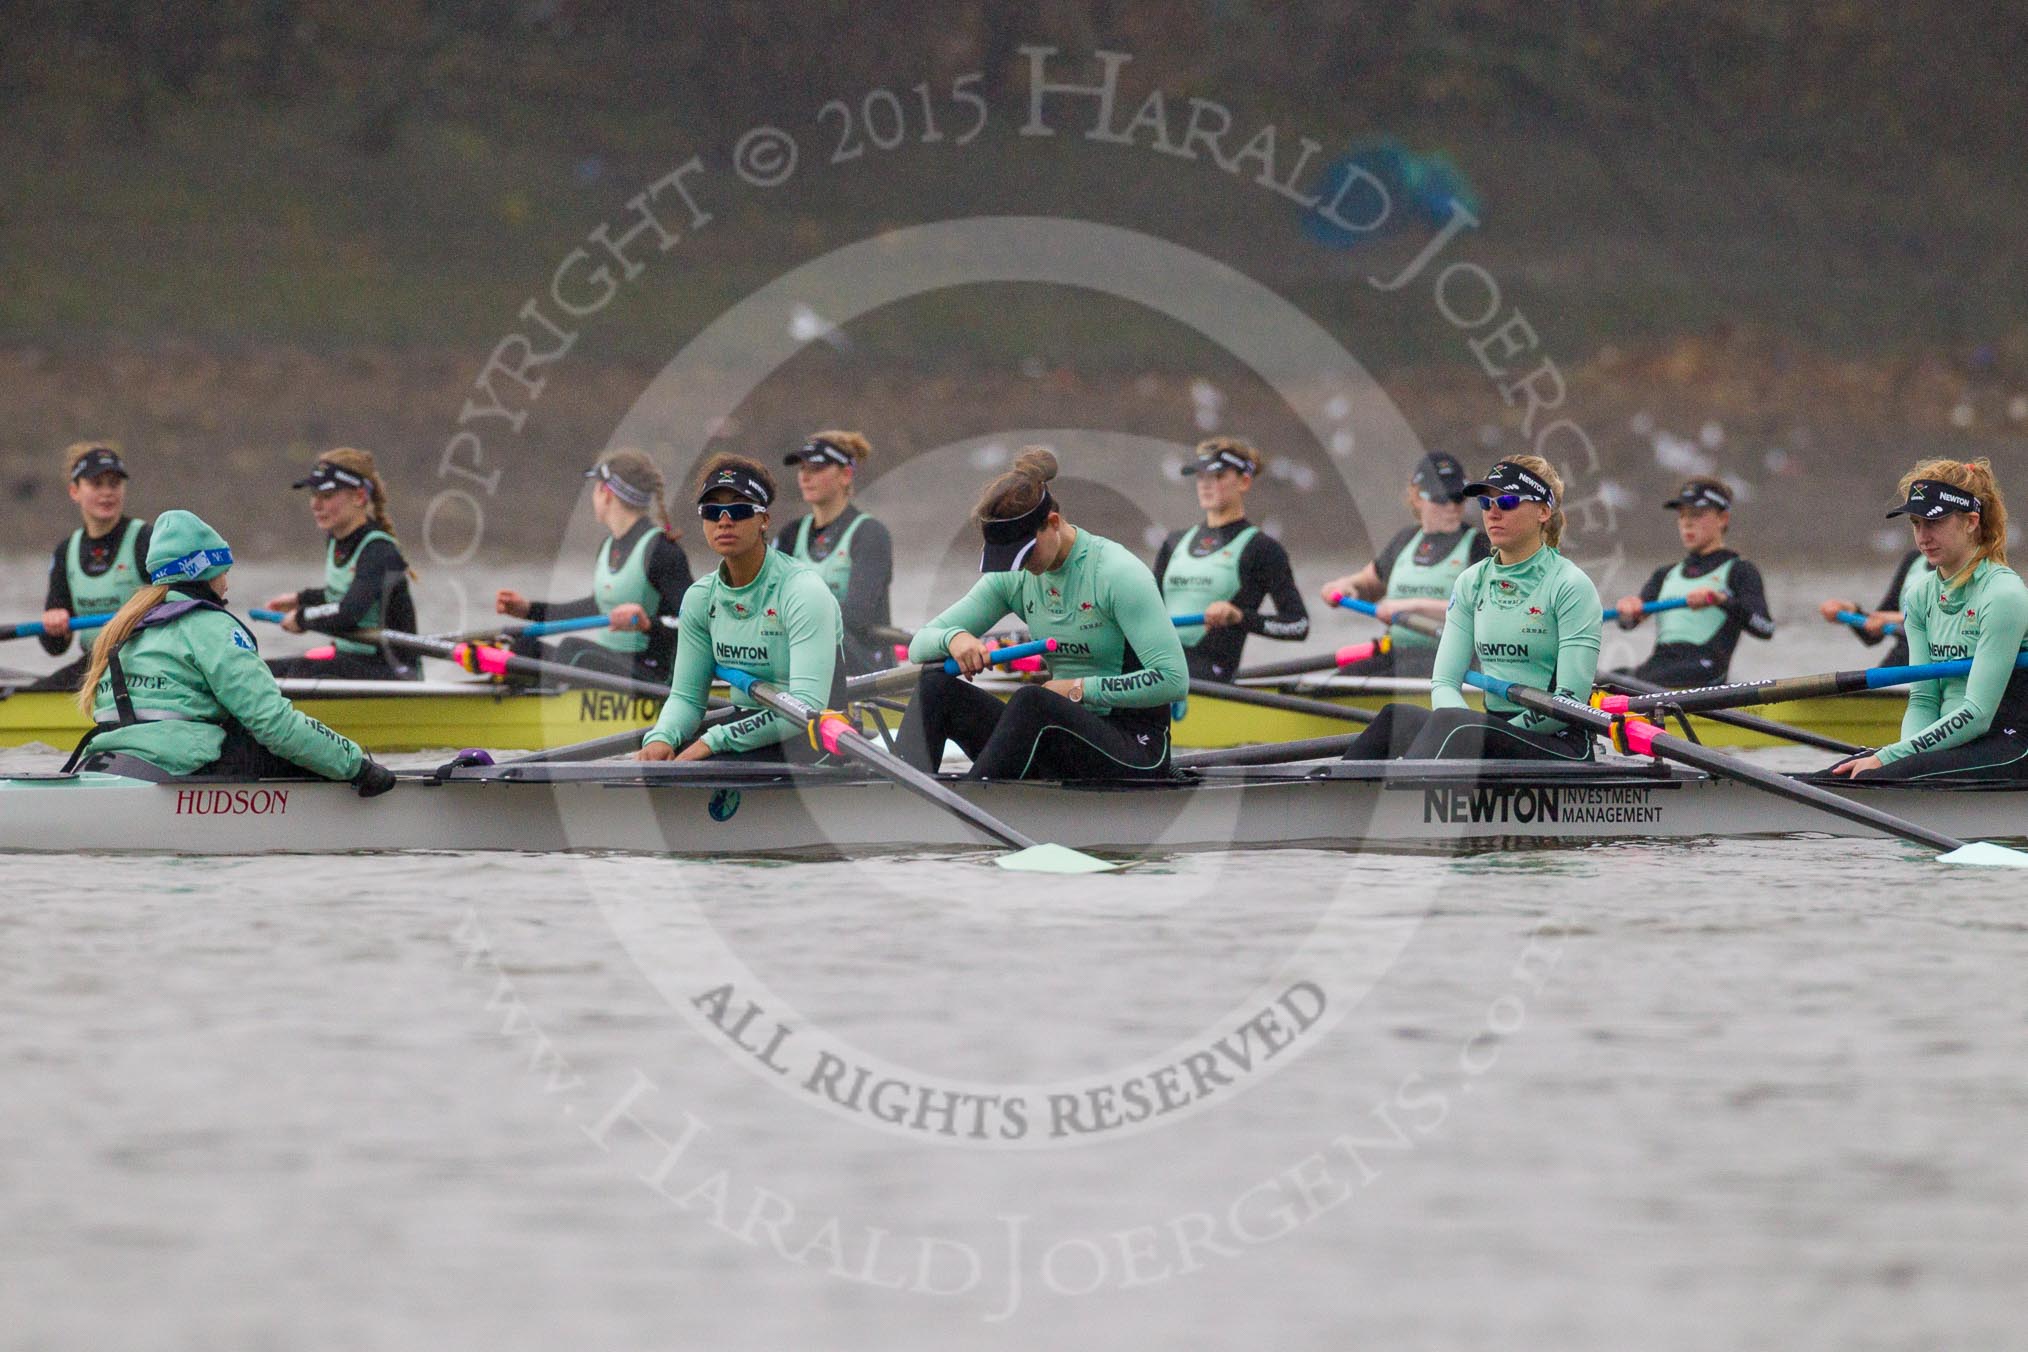 The Boat Race season 2016 - Women's Boat Race Trial Eights (CUWBC, Cambridge): "Tideway" and "Twickenham"  (behind) waiting for the start of the race.
River Thames between Putney Bridge and Mortlake,
London SW15,

United Kingdom,
on 10 December 2015 at 10:57, image #35